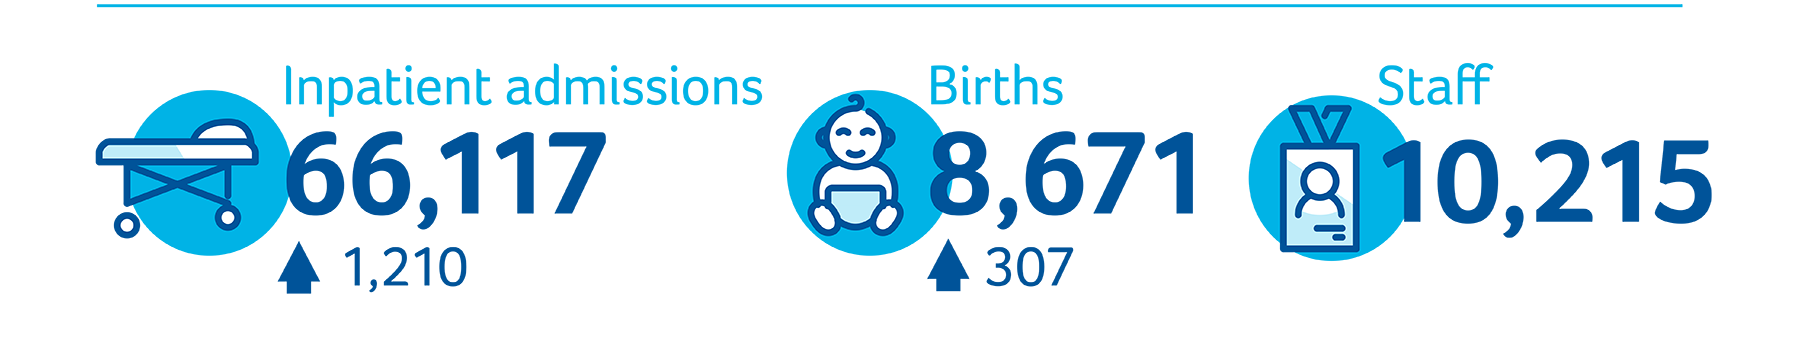 66,117 inpatient admissions (1,210 more than last year). 8,671 births (307 more than previous year), 10,215 Staff